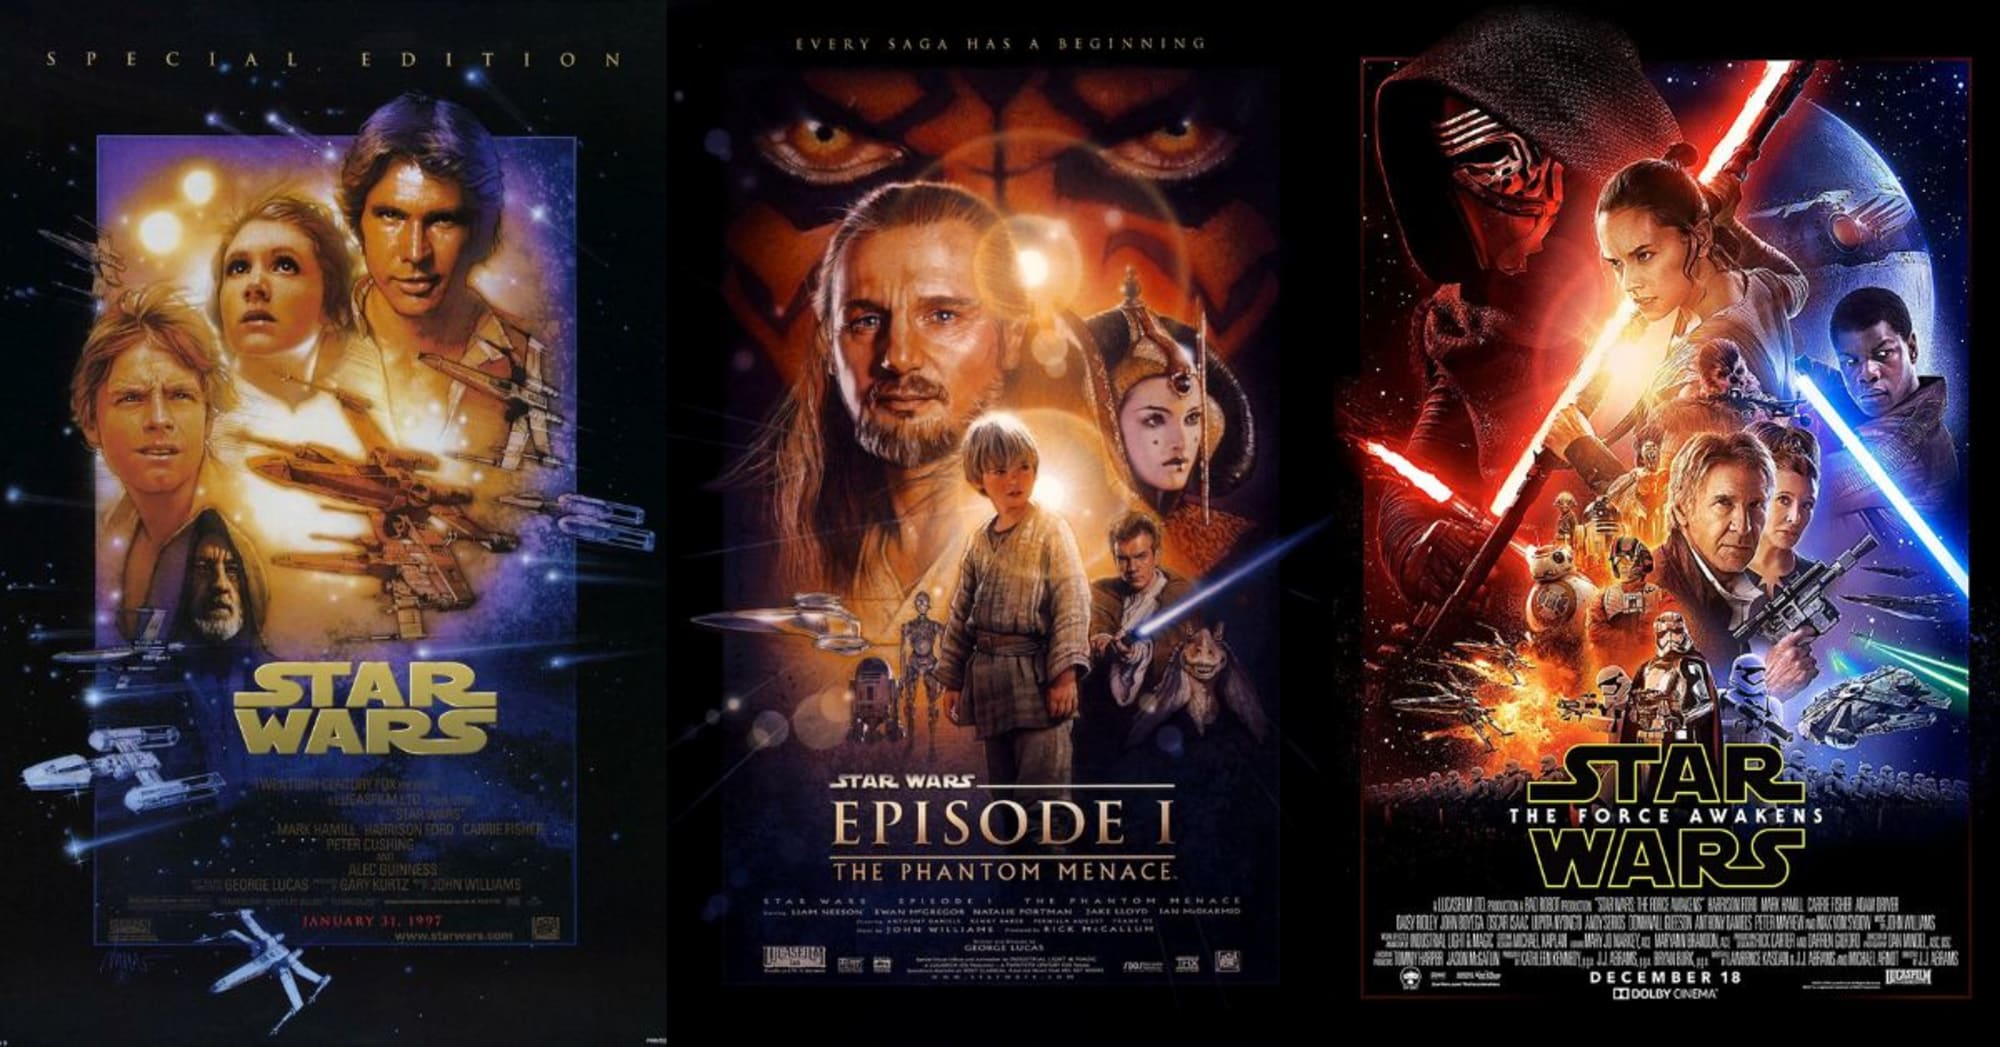 25 of the most iconic Star Wars movie posters of all time